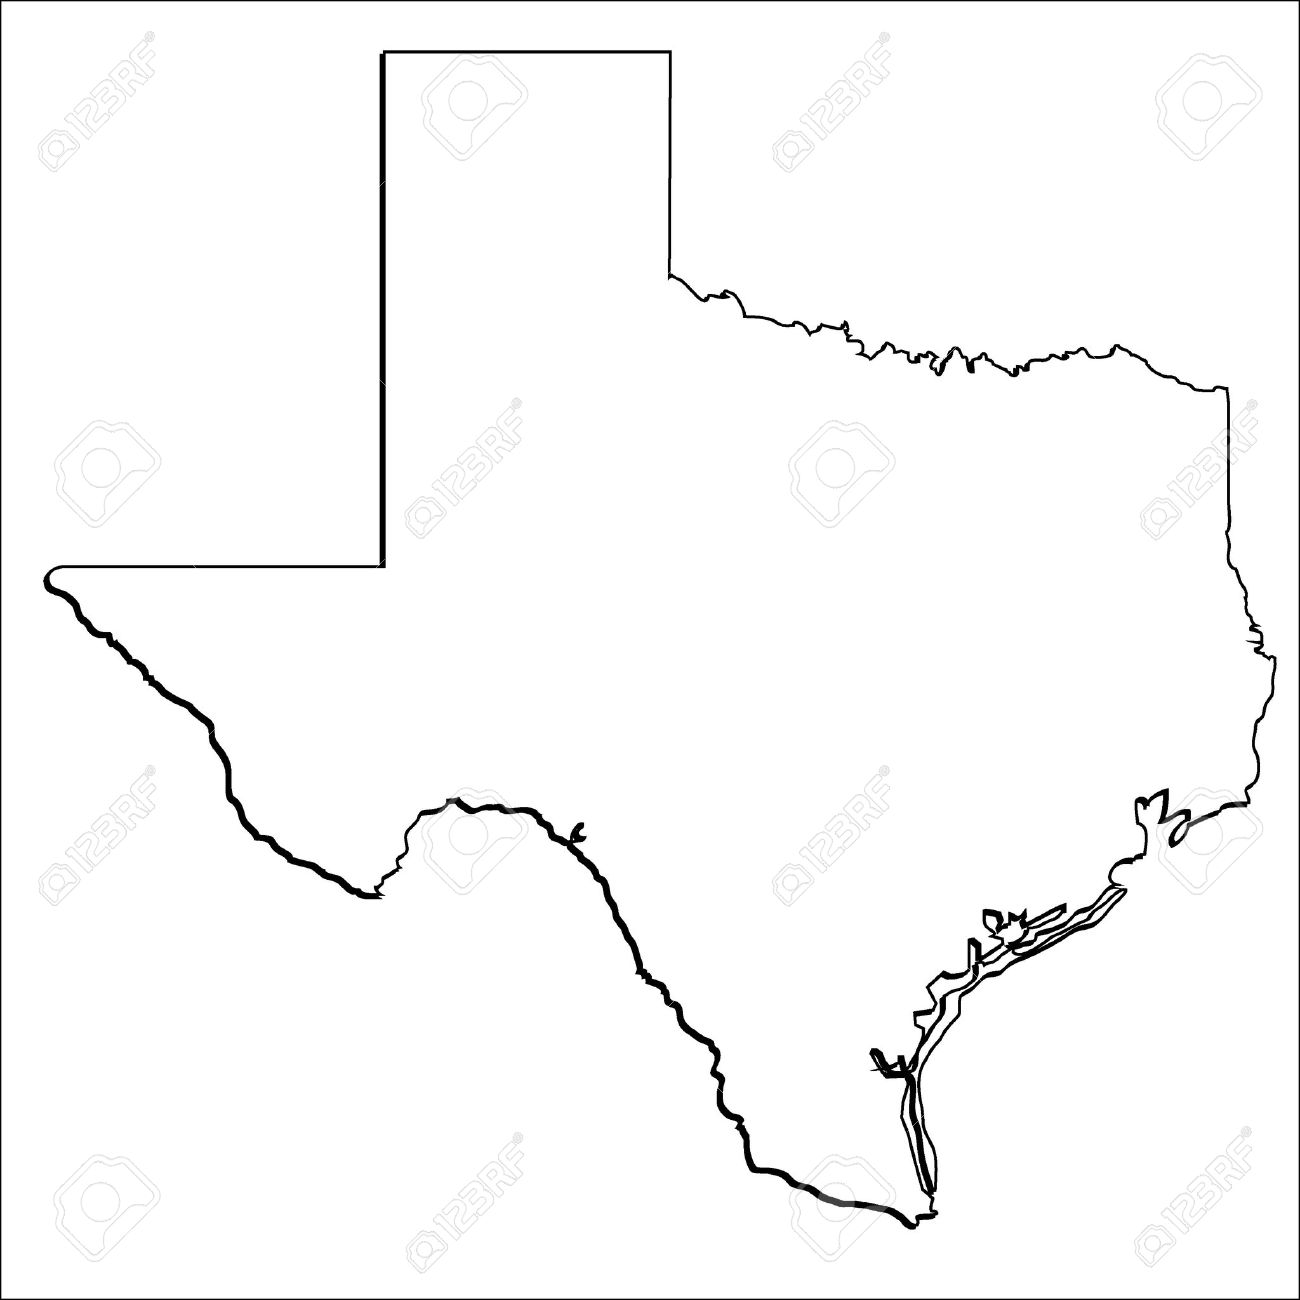 Top How To Draw Texas State Step By Step of the decade The ultimate